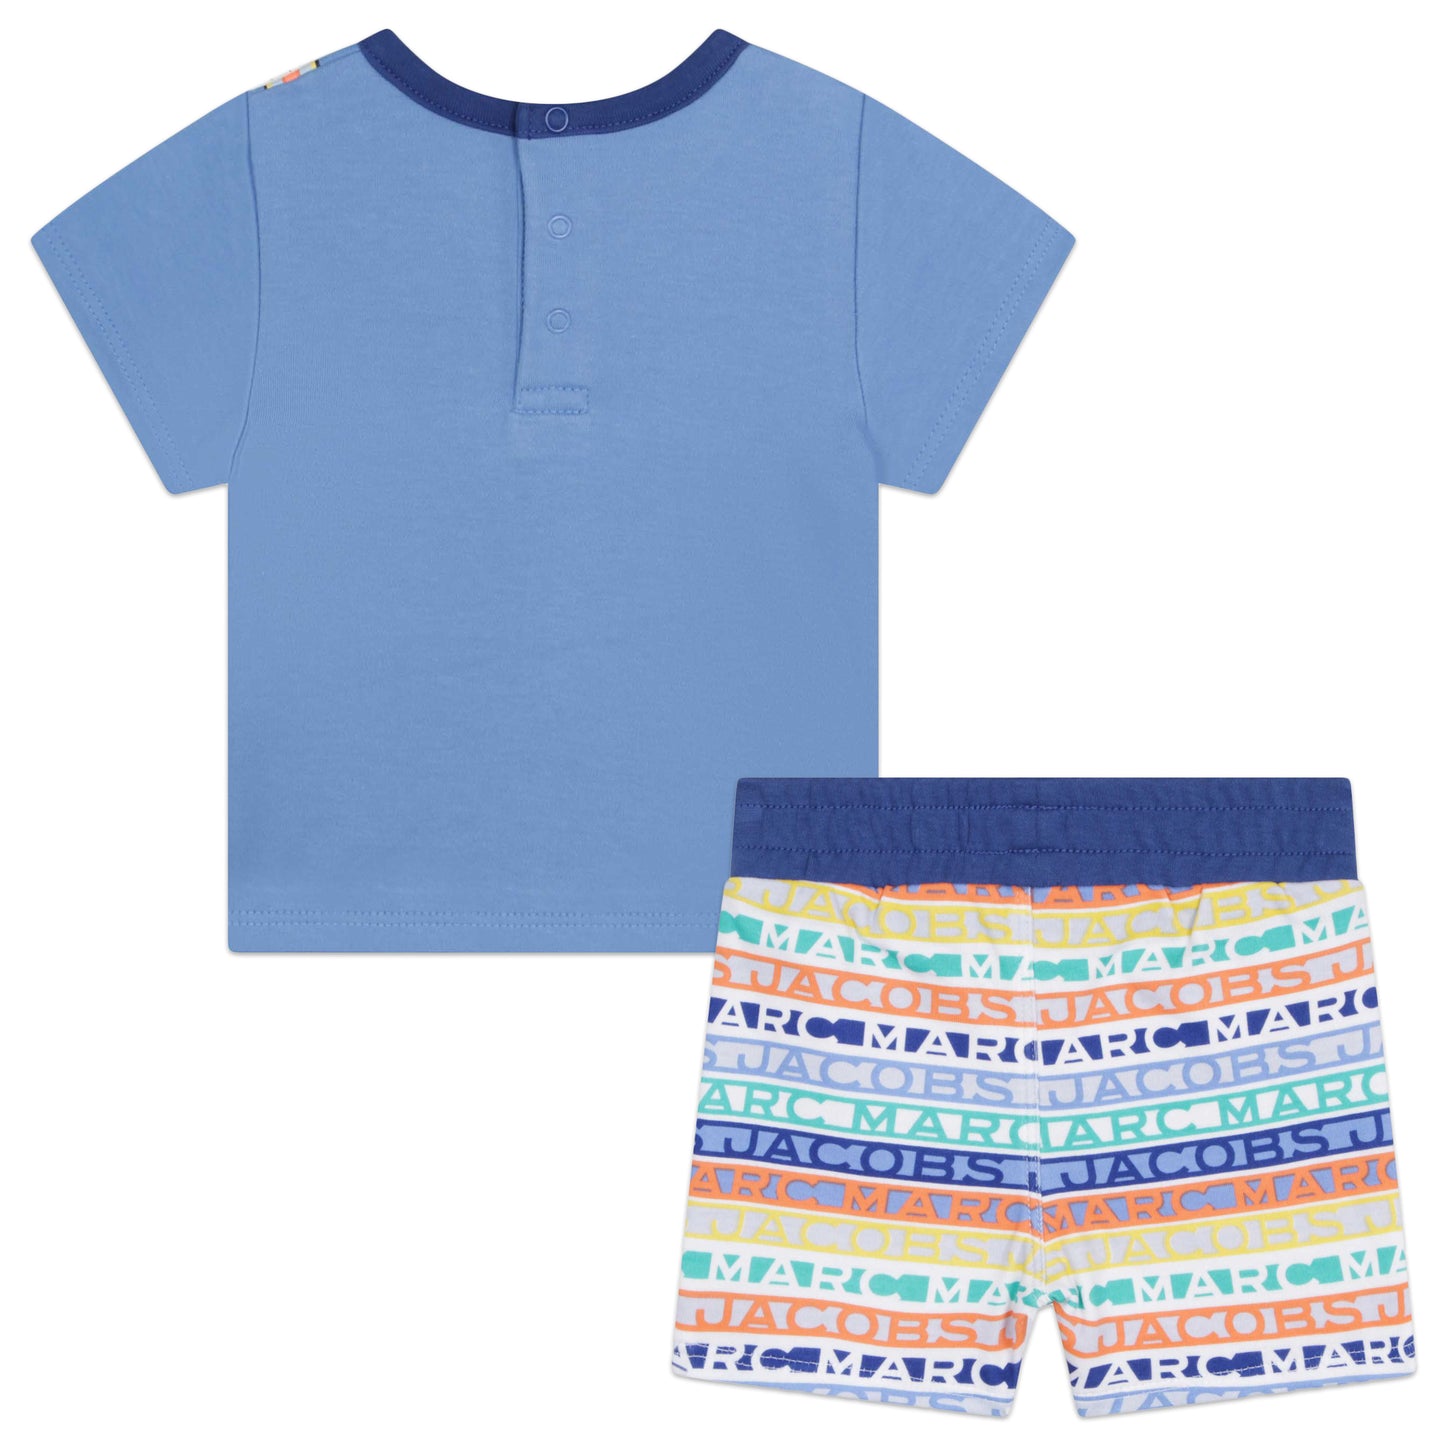 Little Marc Jacobs Fanny Pack Tee Shirt & Shorts 2Pc Outfit